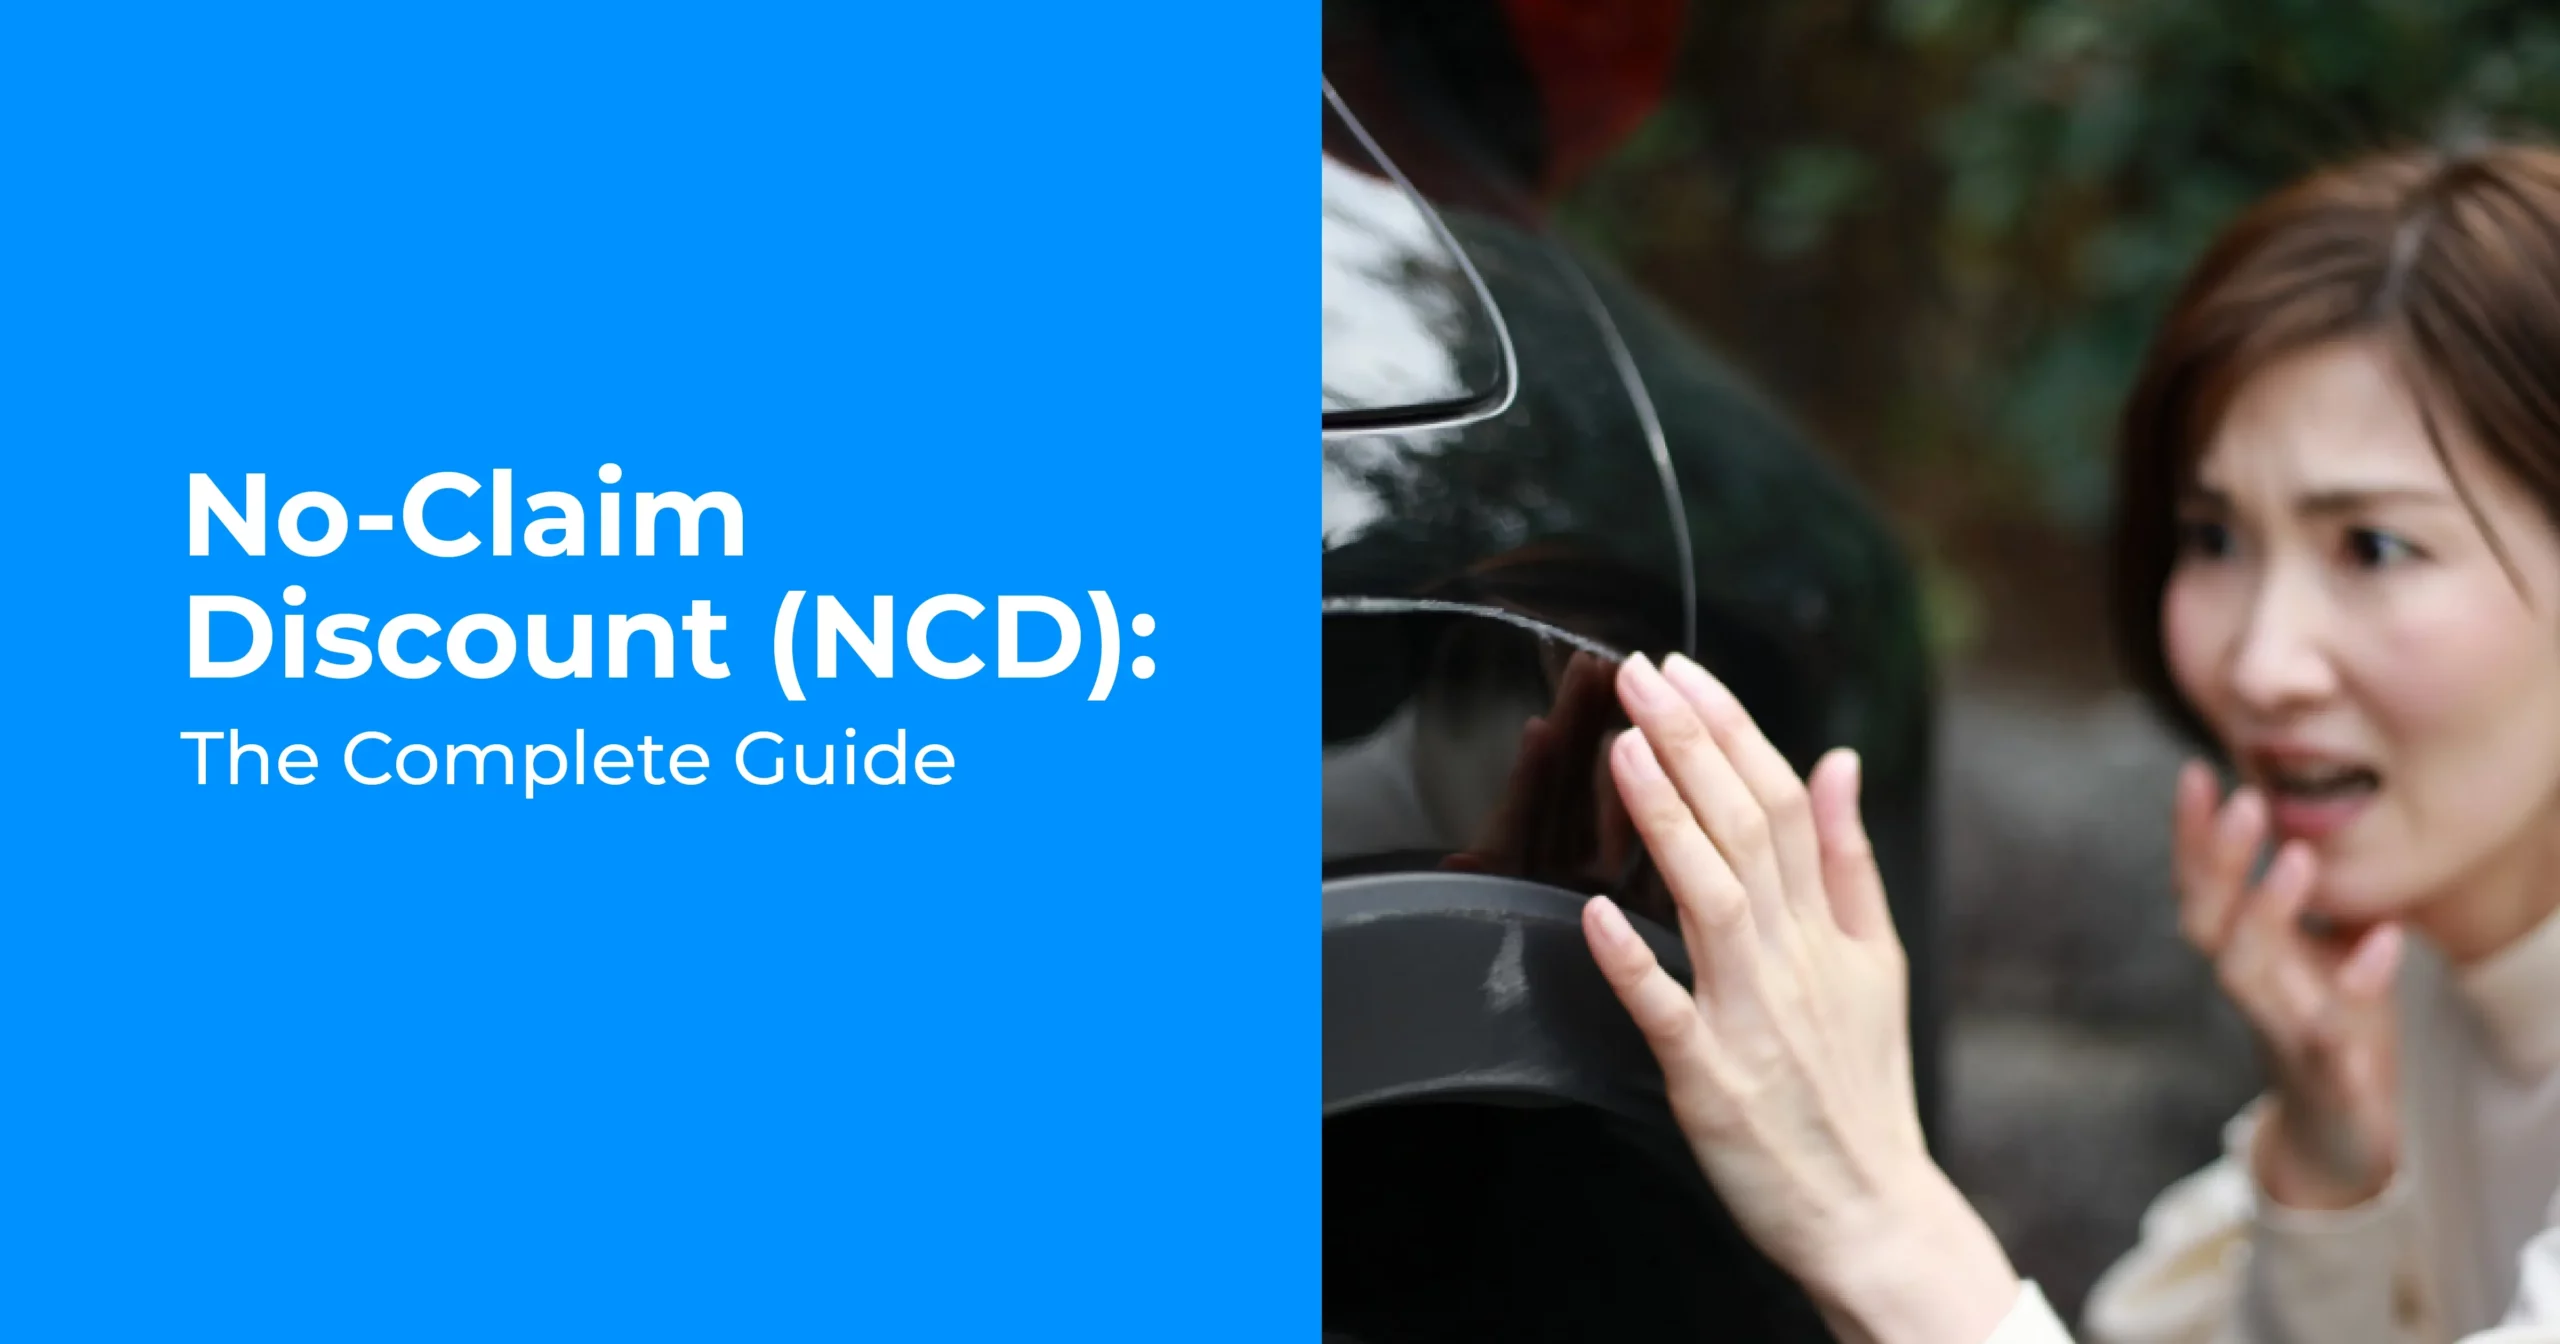 11Comprehensive guide on no-claim discount (NCD).